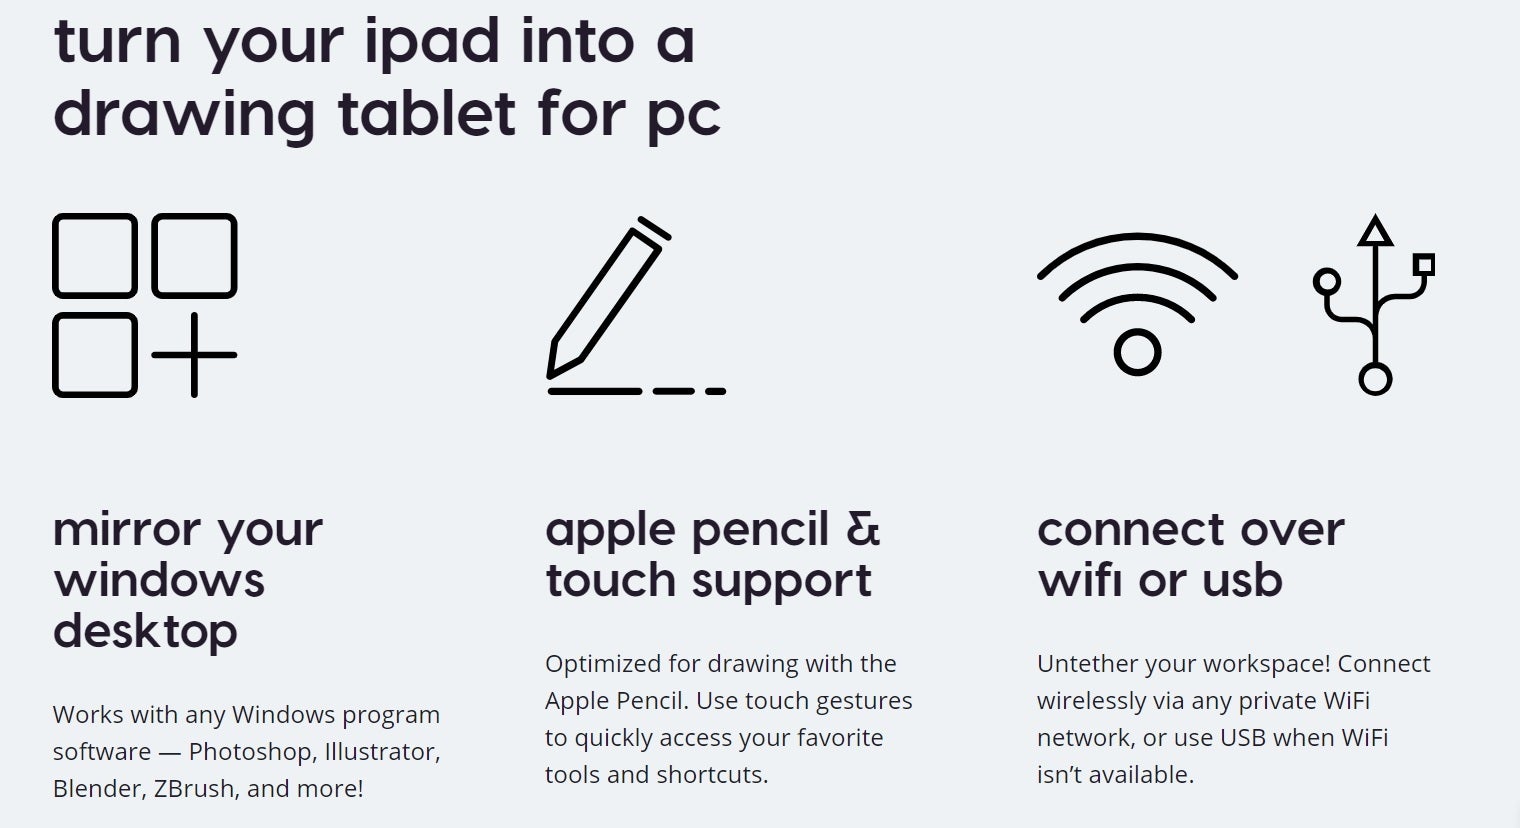 Astropad converts your iPad into a drawing tablet for Mac and PC